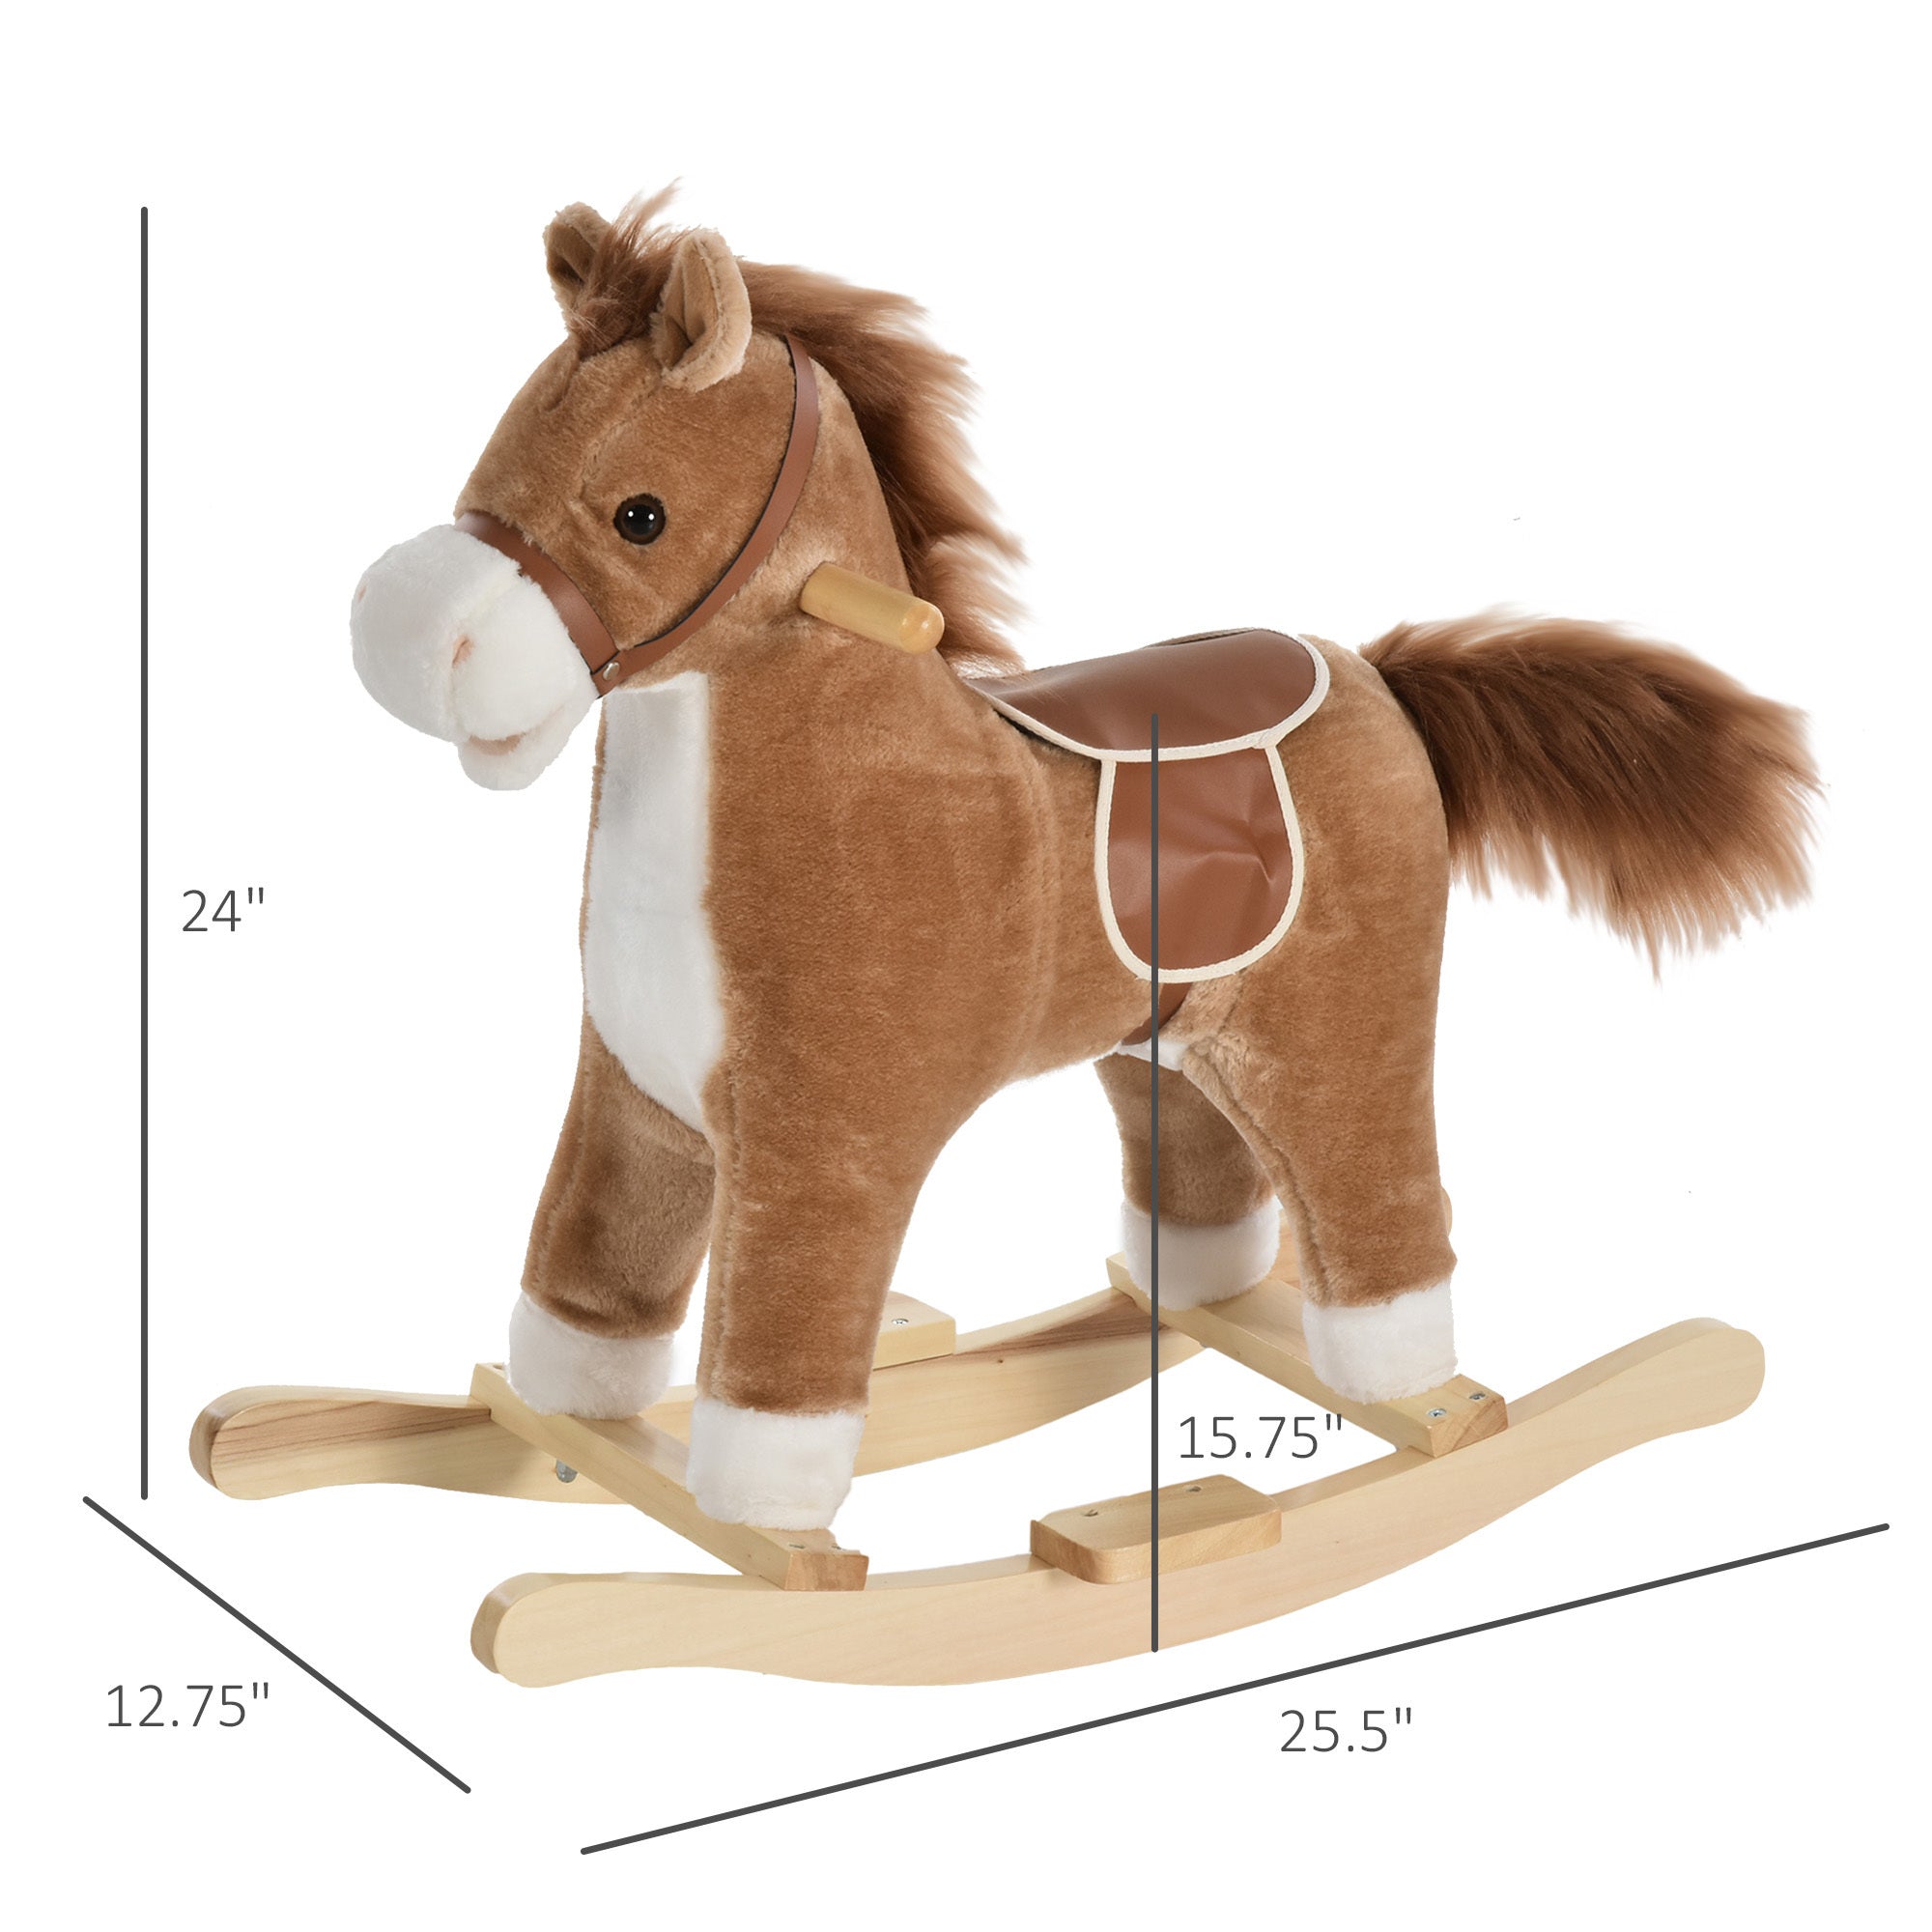 Rocking Horse Plush Animal on Wooden Rockers, Baby Rocking Chair with Sounds, Moving Mouth, Wagging Tail, Brown